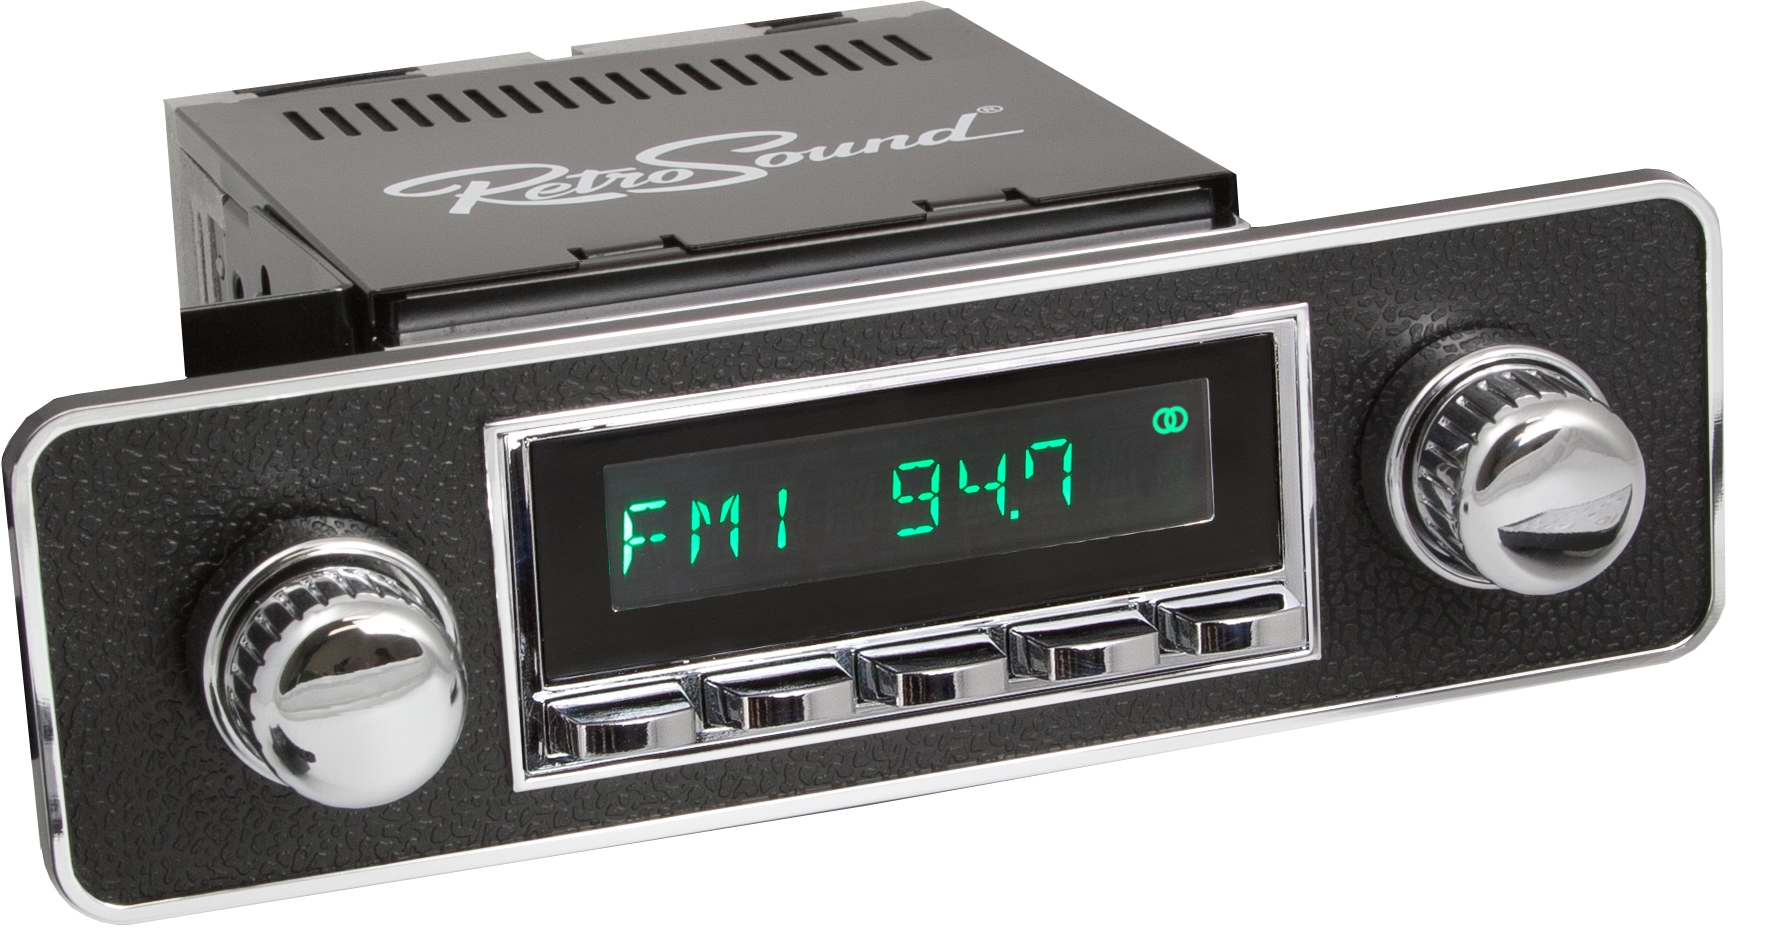 Retro Sounds Radios (Faceplates Sold Separately)